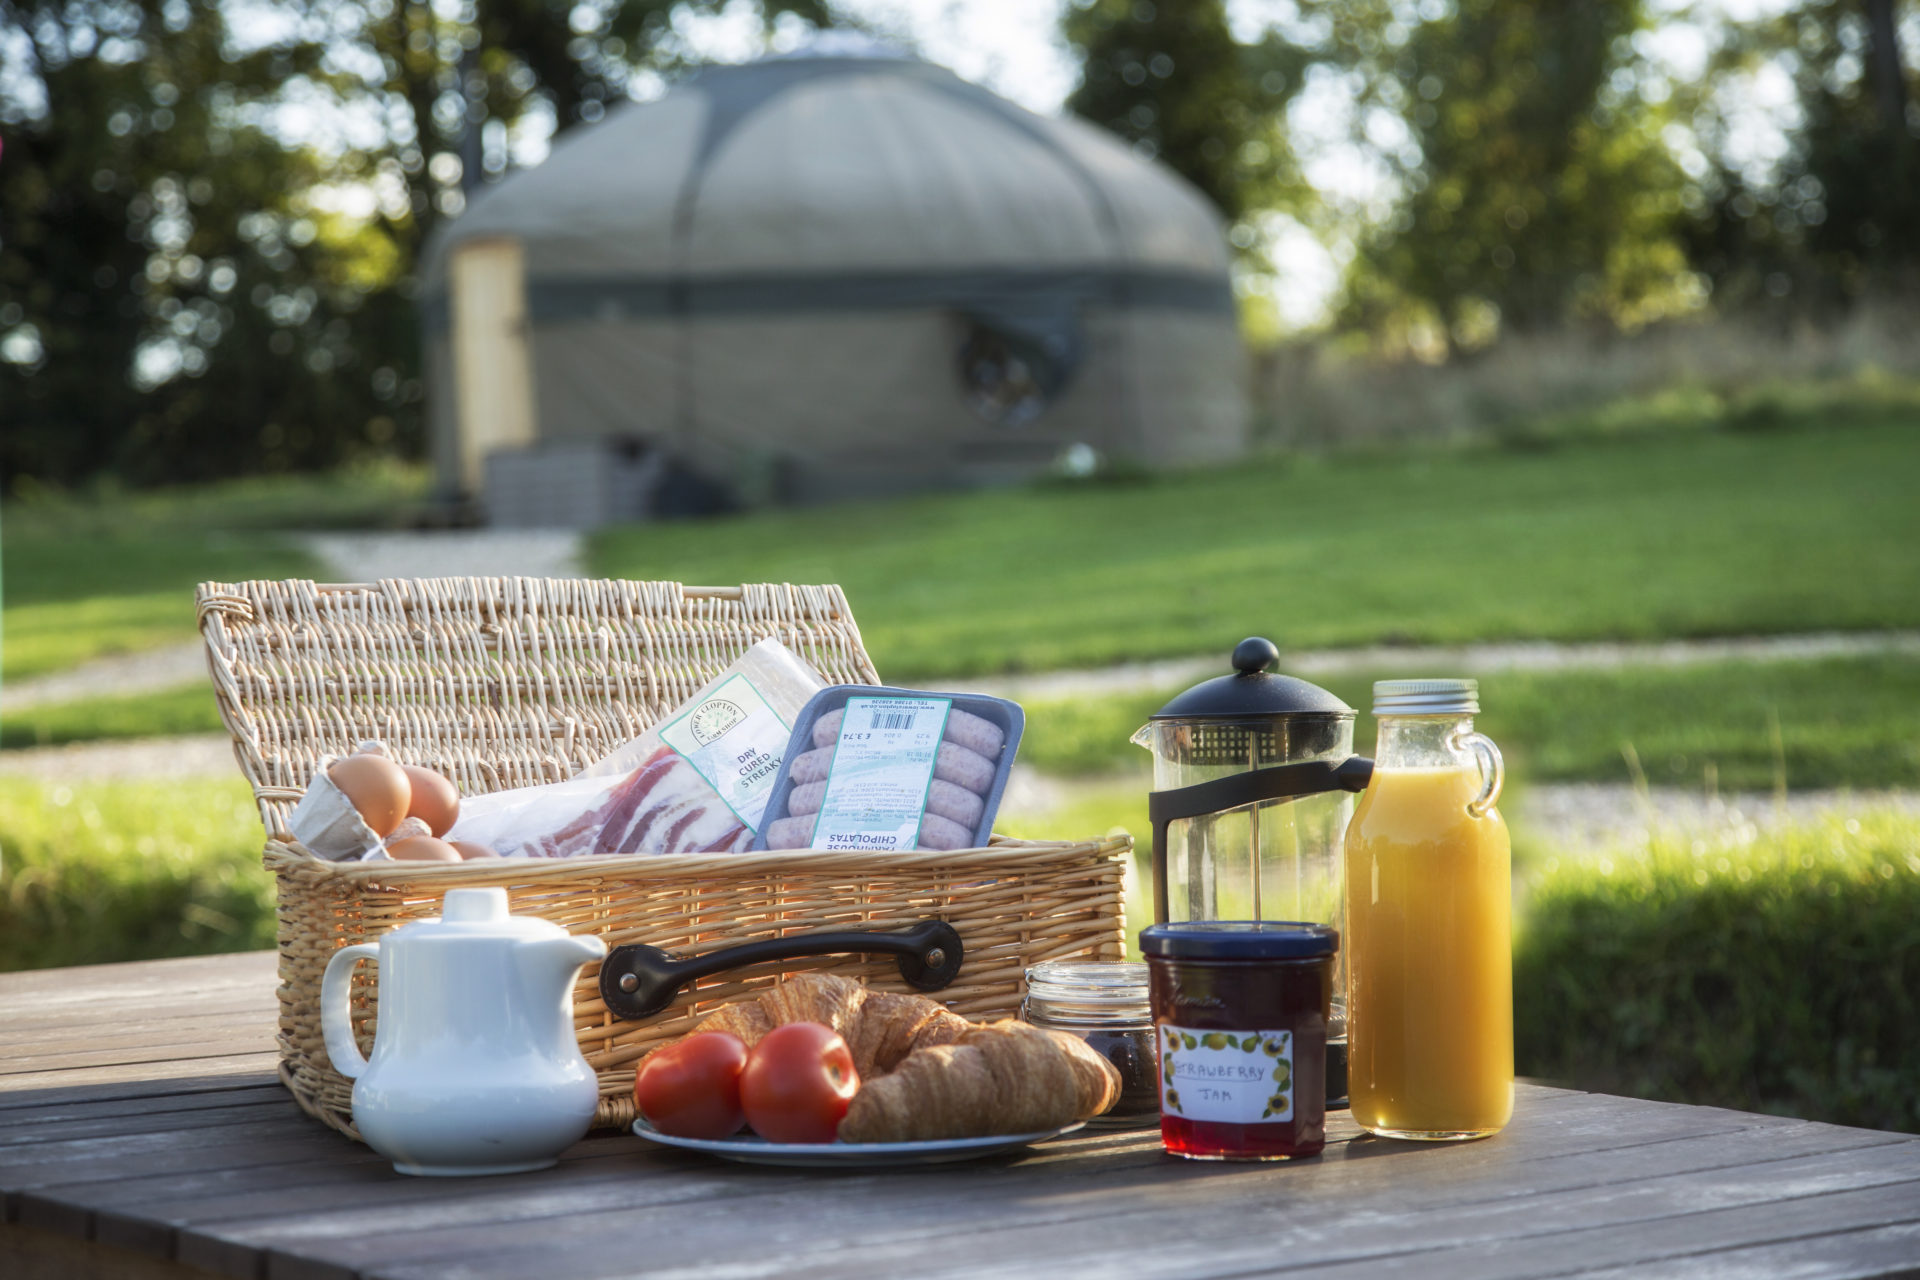 Breakfast hamper with sausages, bacon, eggs and drinks on table in front of yurt